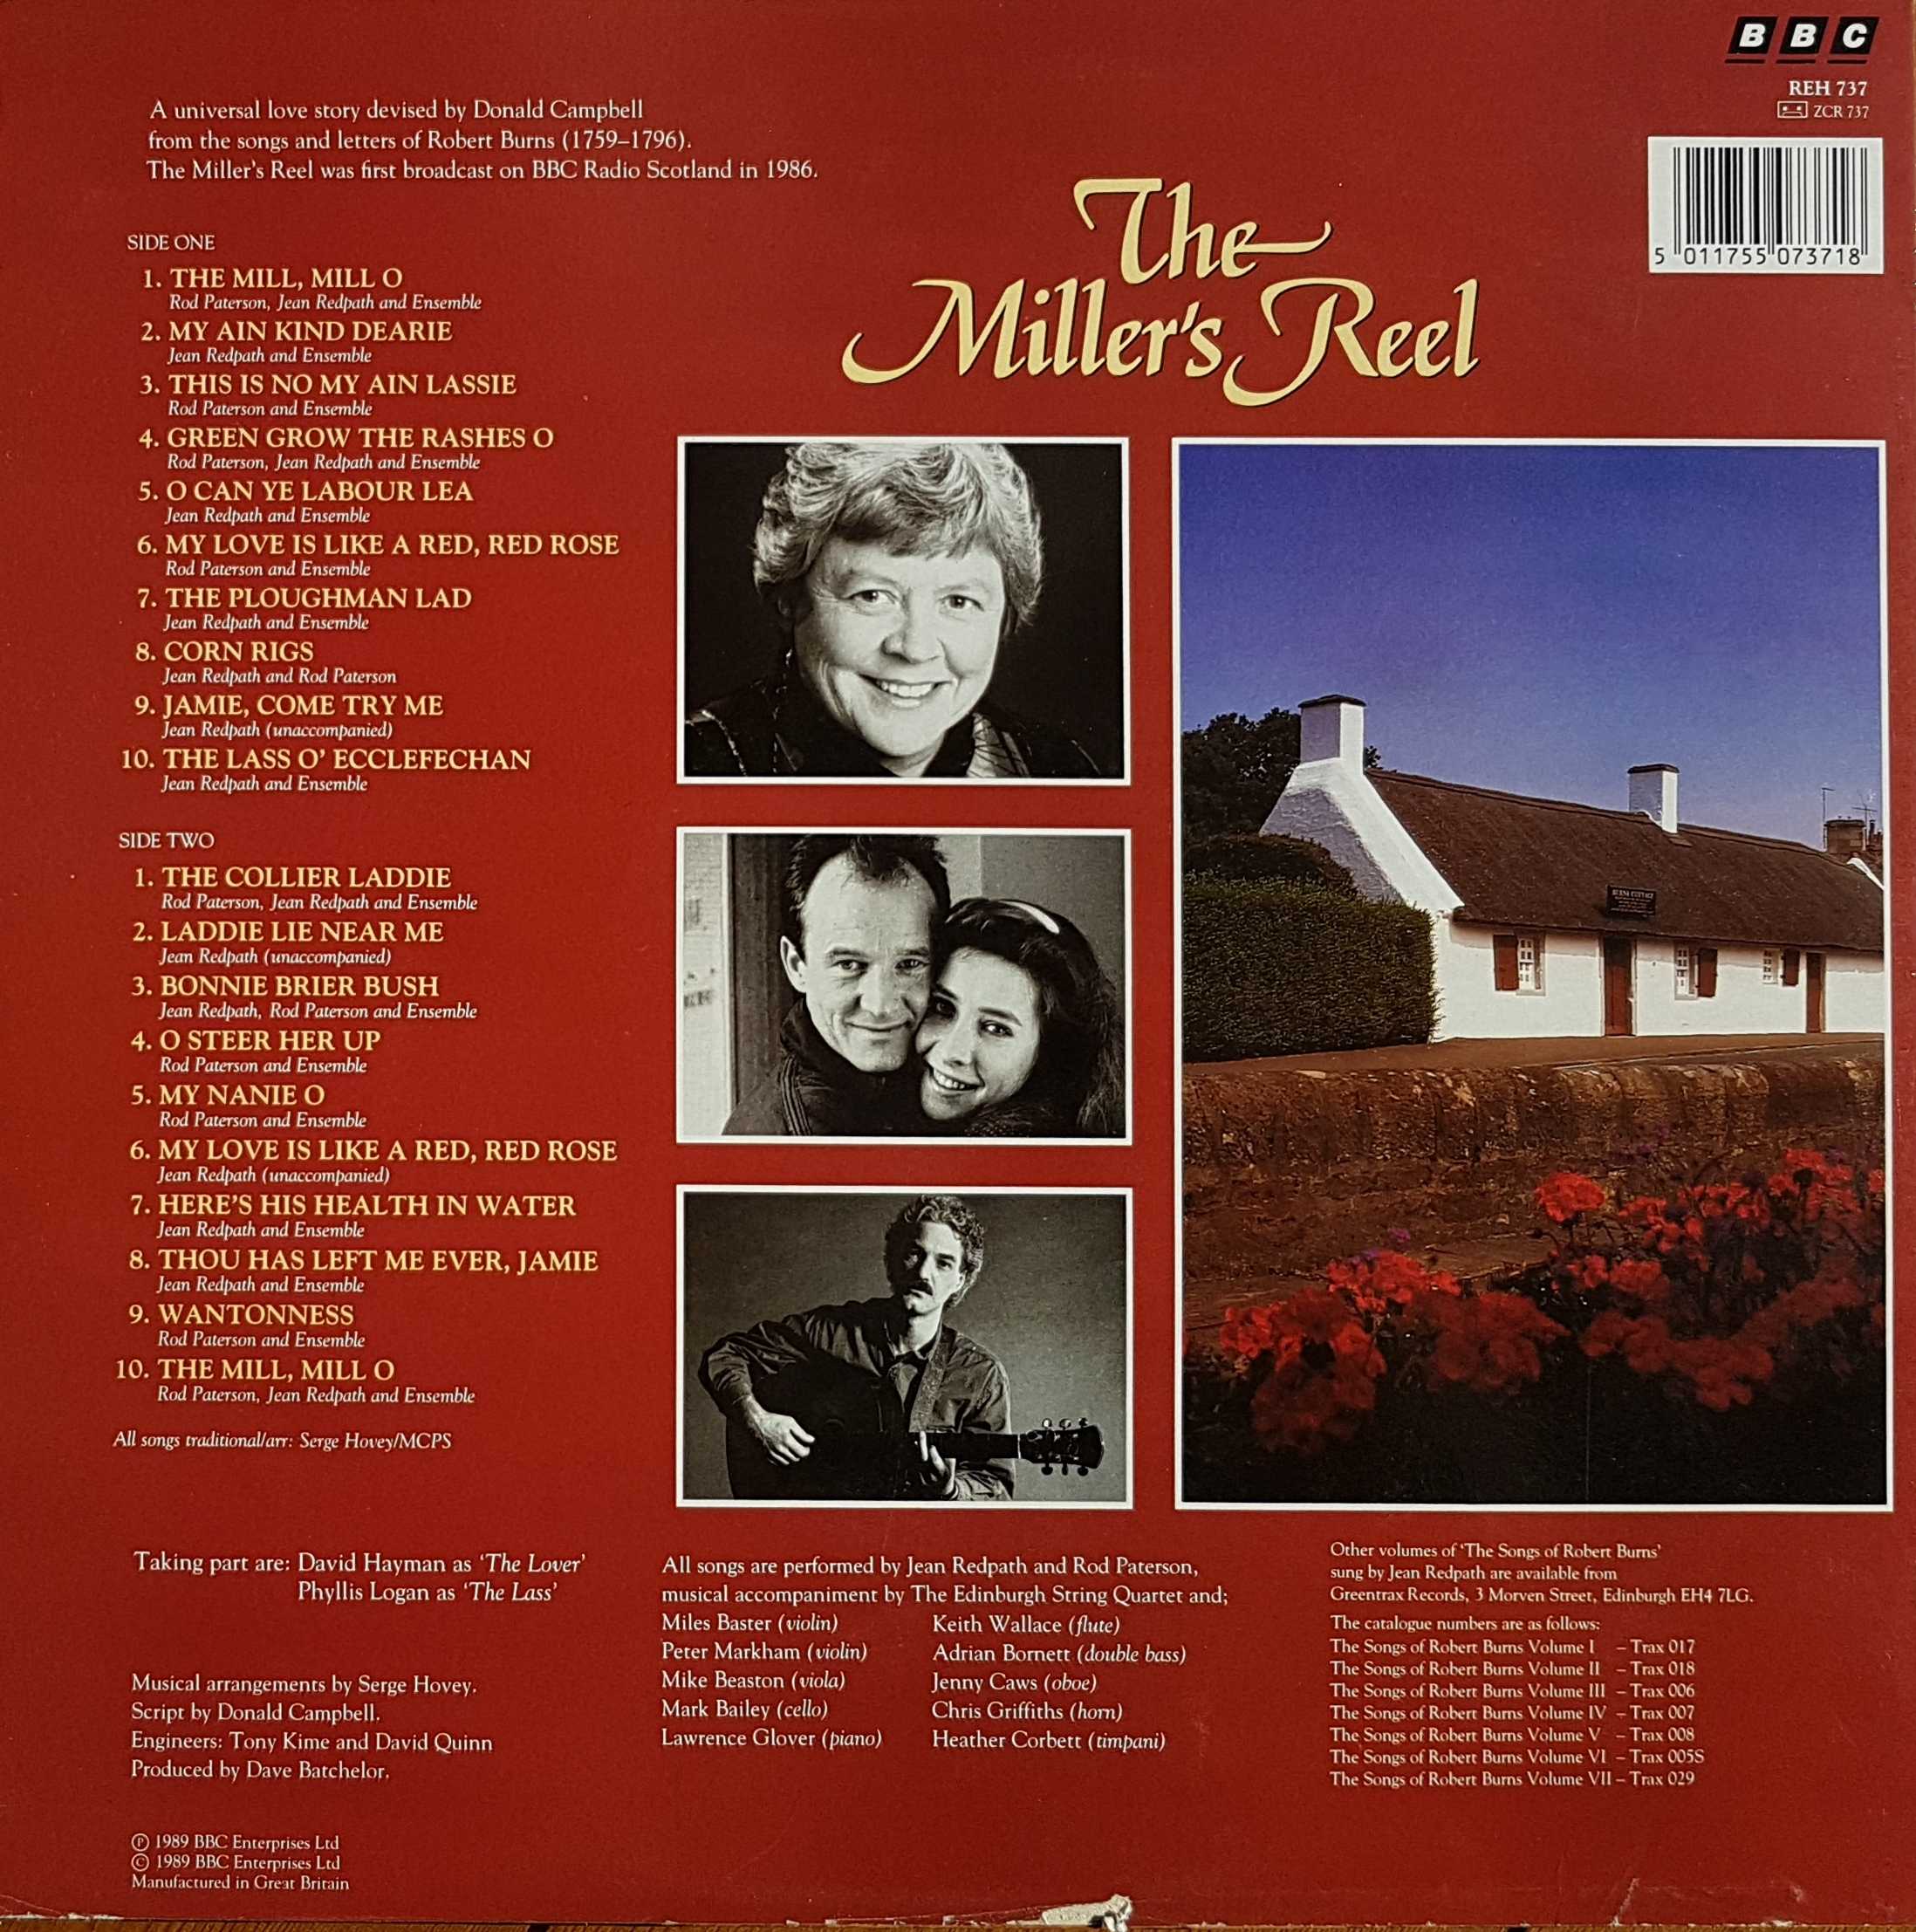 Picture of REH 737 The miller's reel by artist Redpath from the BBC records and Tapes library